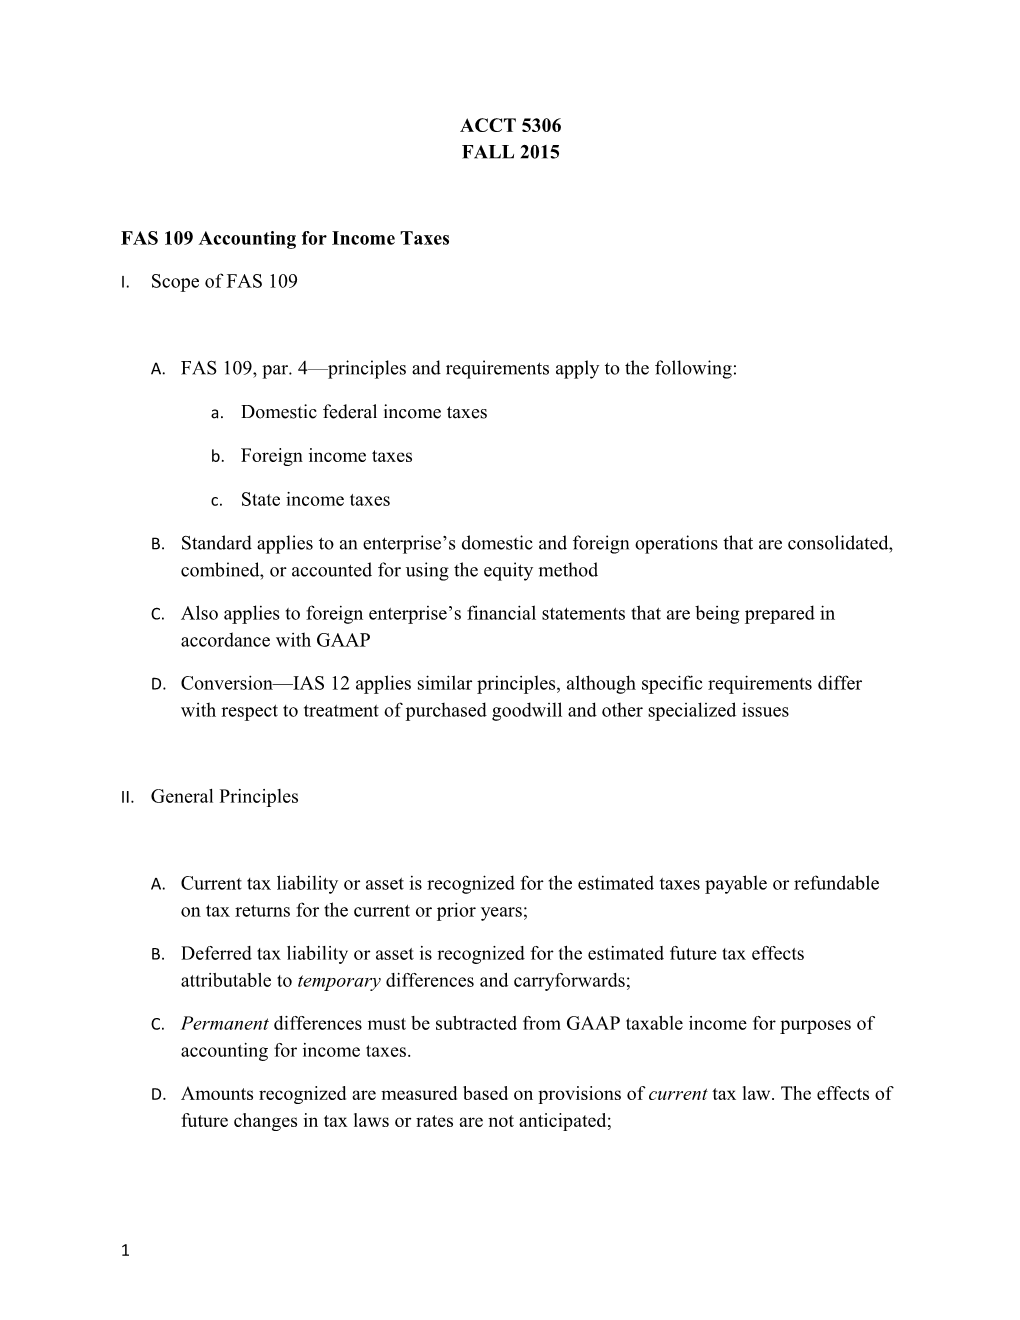 FAS 109 Accounting for Income Taxes